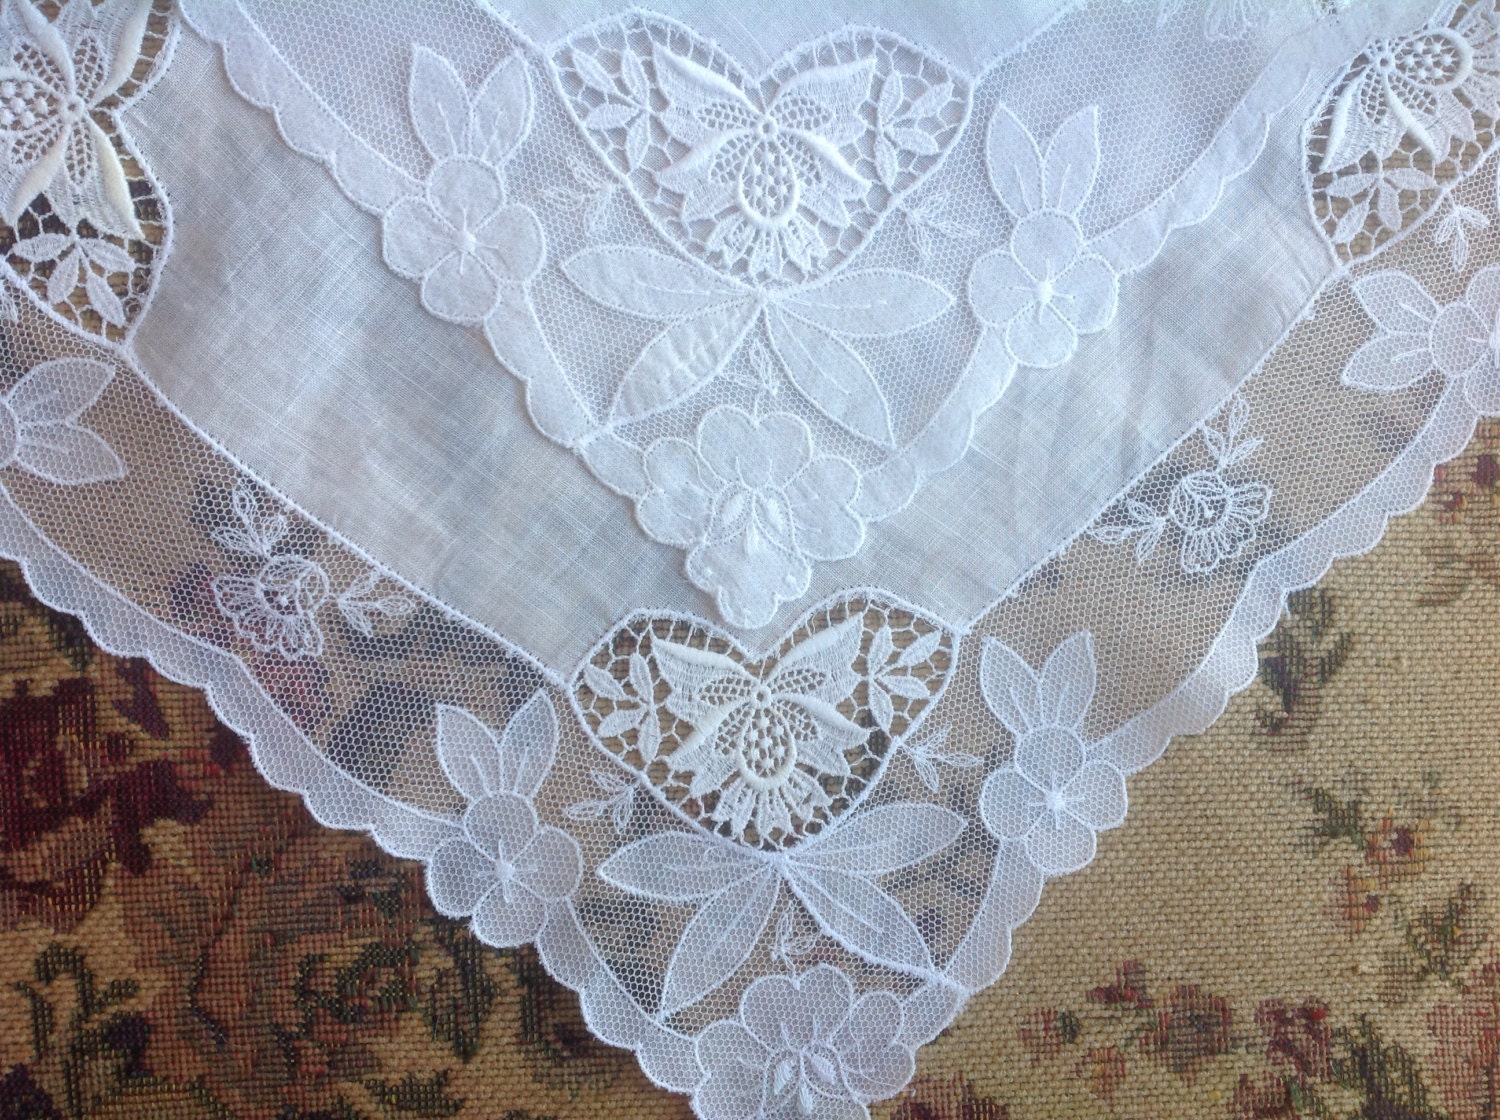 VINTAGE LACE HANDKERCHIEFS French Net Lace Embroidered Net